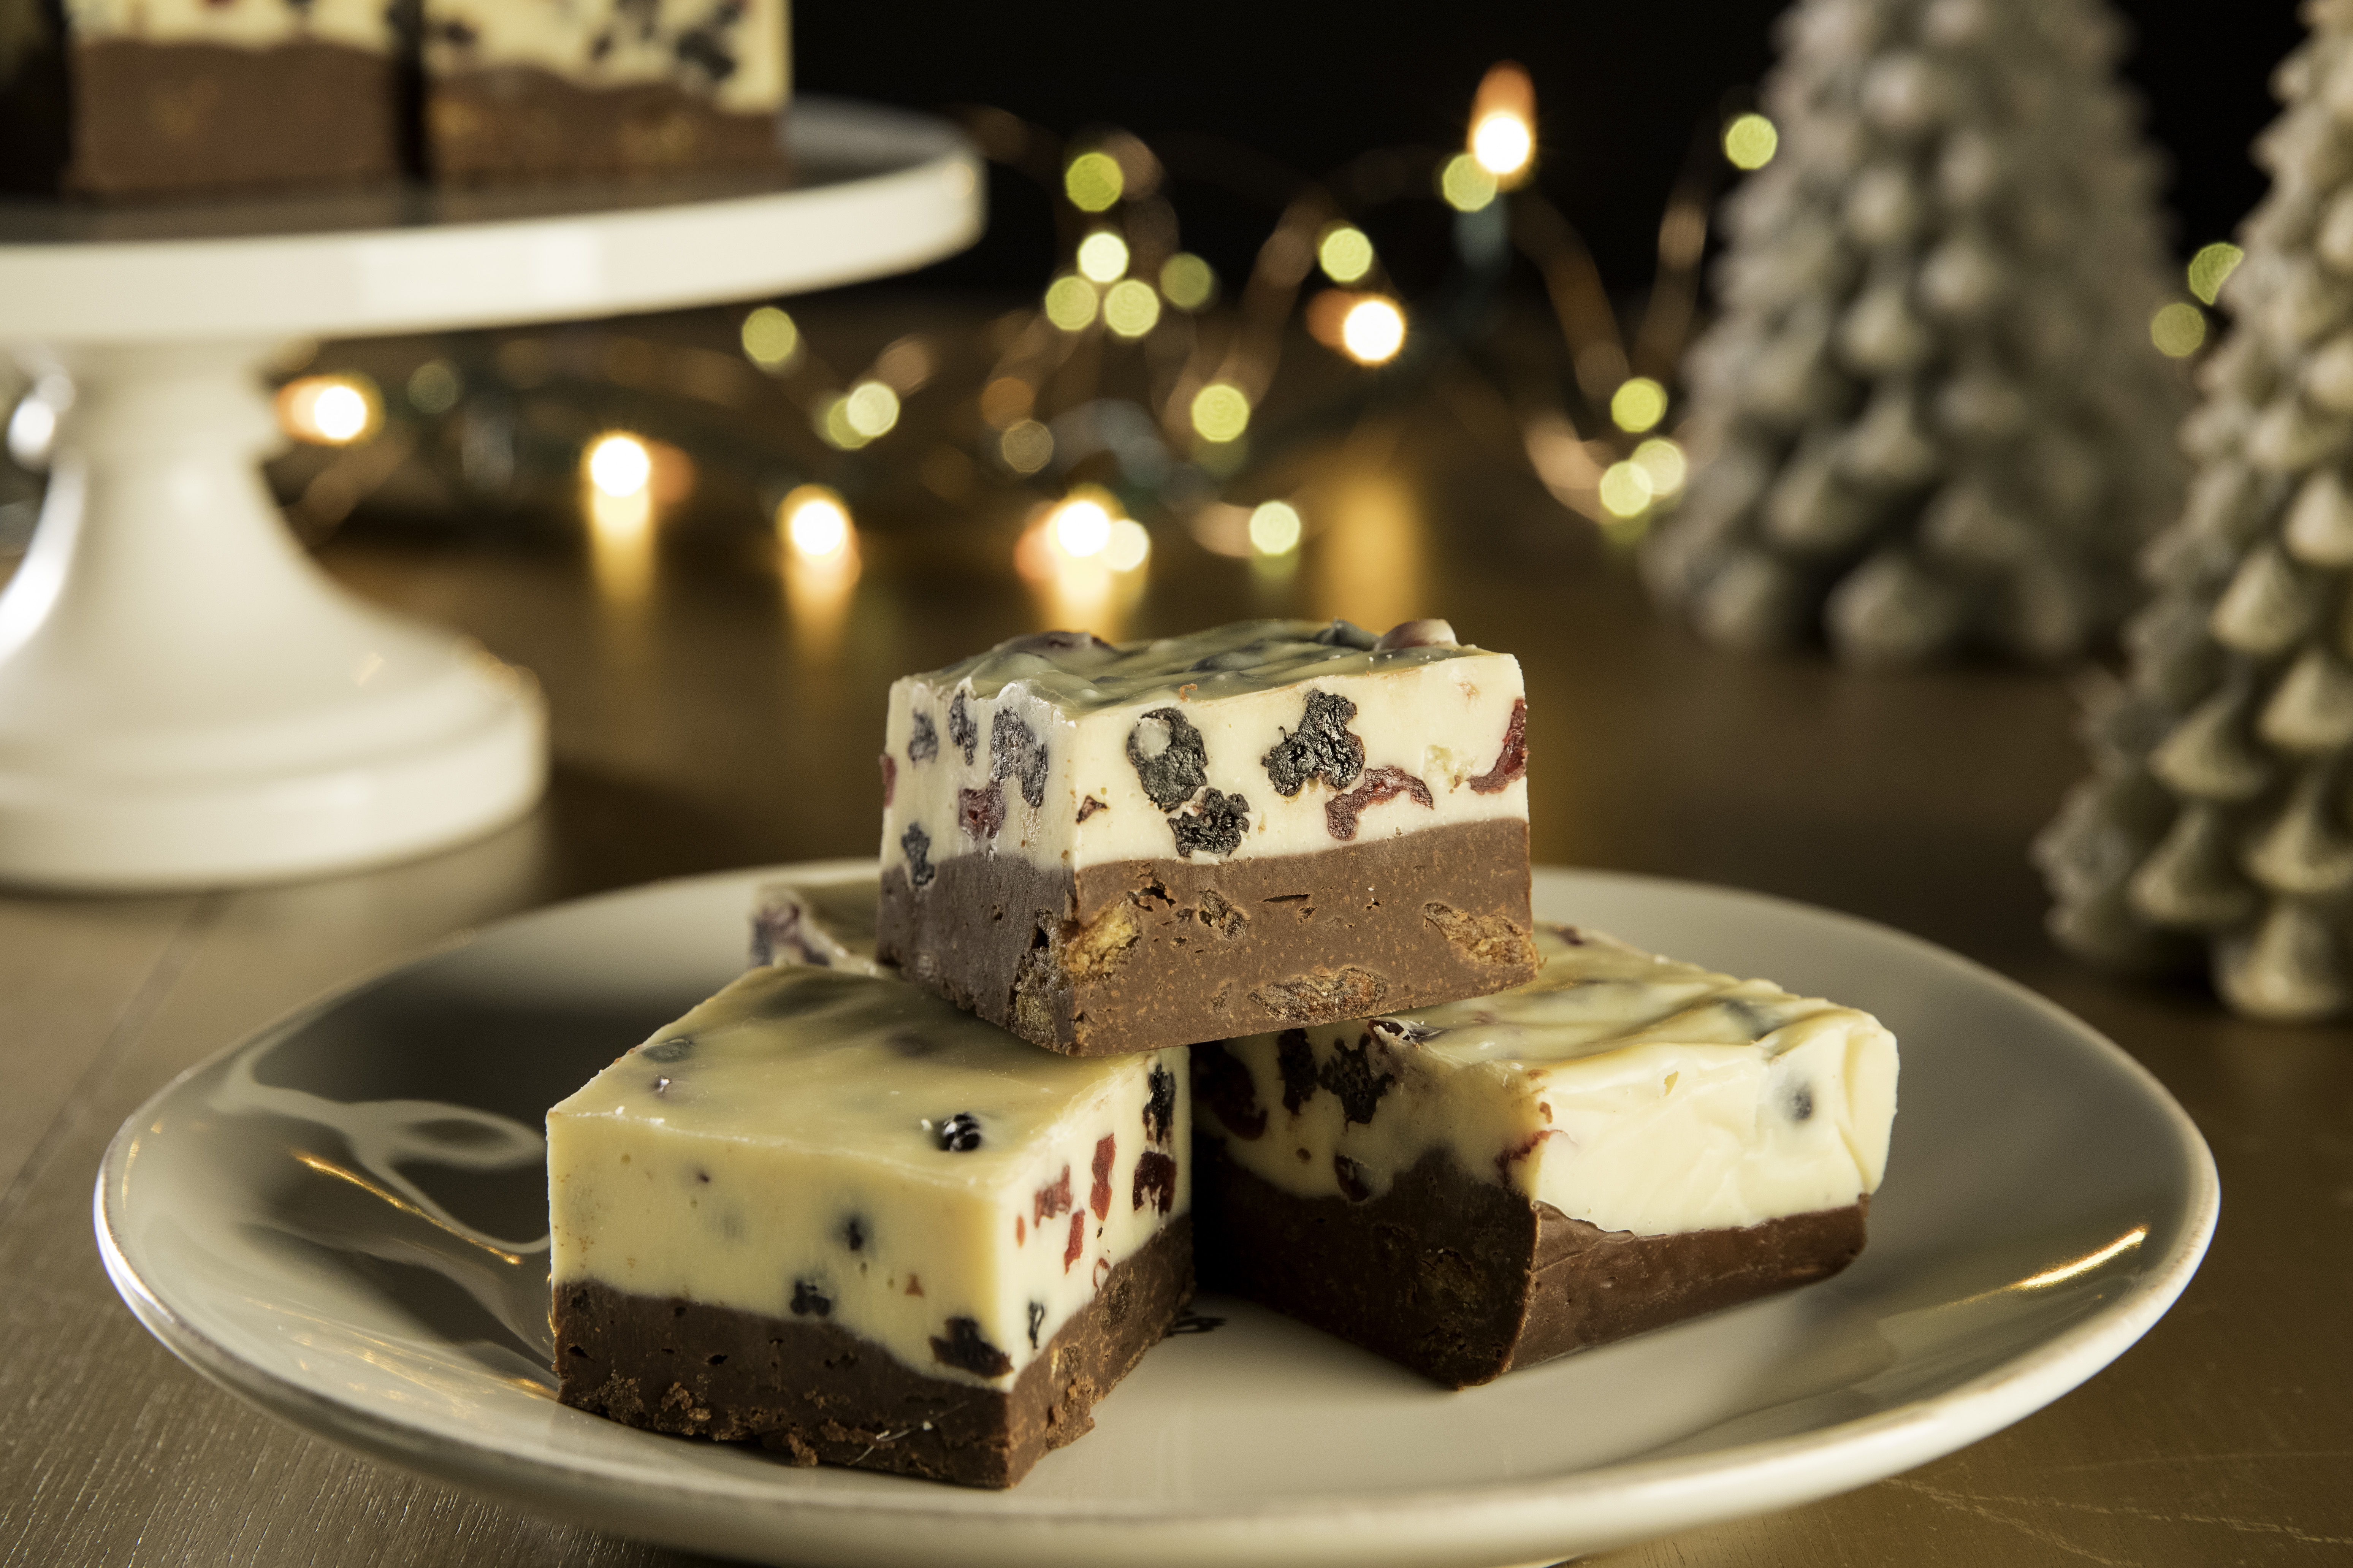 Here’s a way to plus up your fudge for the season, both in looks and in flavor. It’s a double layered fudge with milk chocolate on the bottom and white chocolate on top, and both have the surprise of dried fruit inside. As one tester noted, “It’s what fruit cake would taste like if it was good!